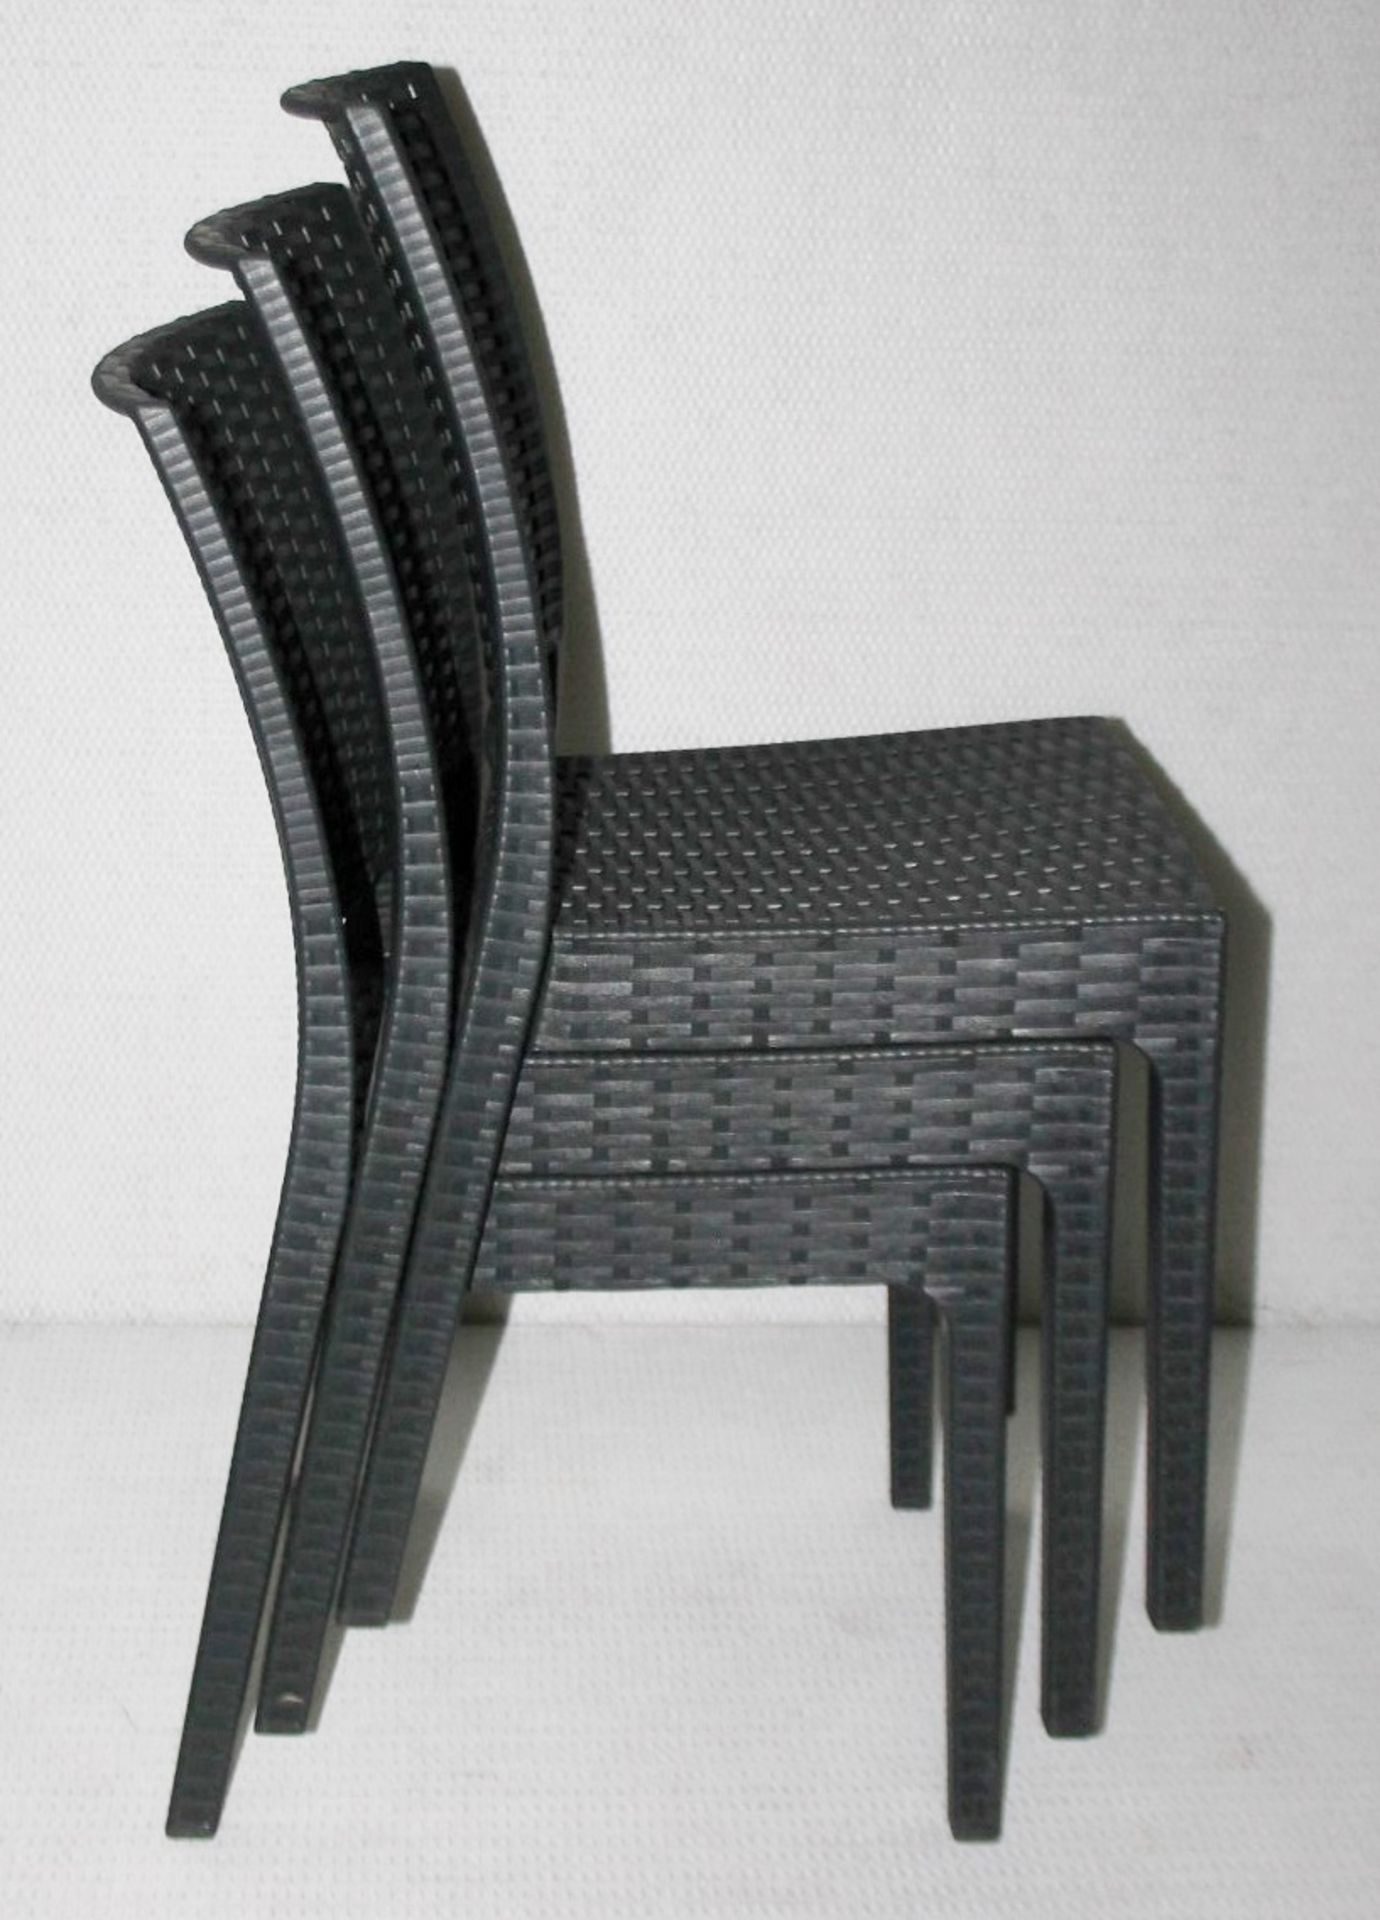 8 x Siesta 'Florida' Rattan Style Garden Chairs In Dark Grey - Suitable For Commercial or Home Use - - Image 10 of 14